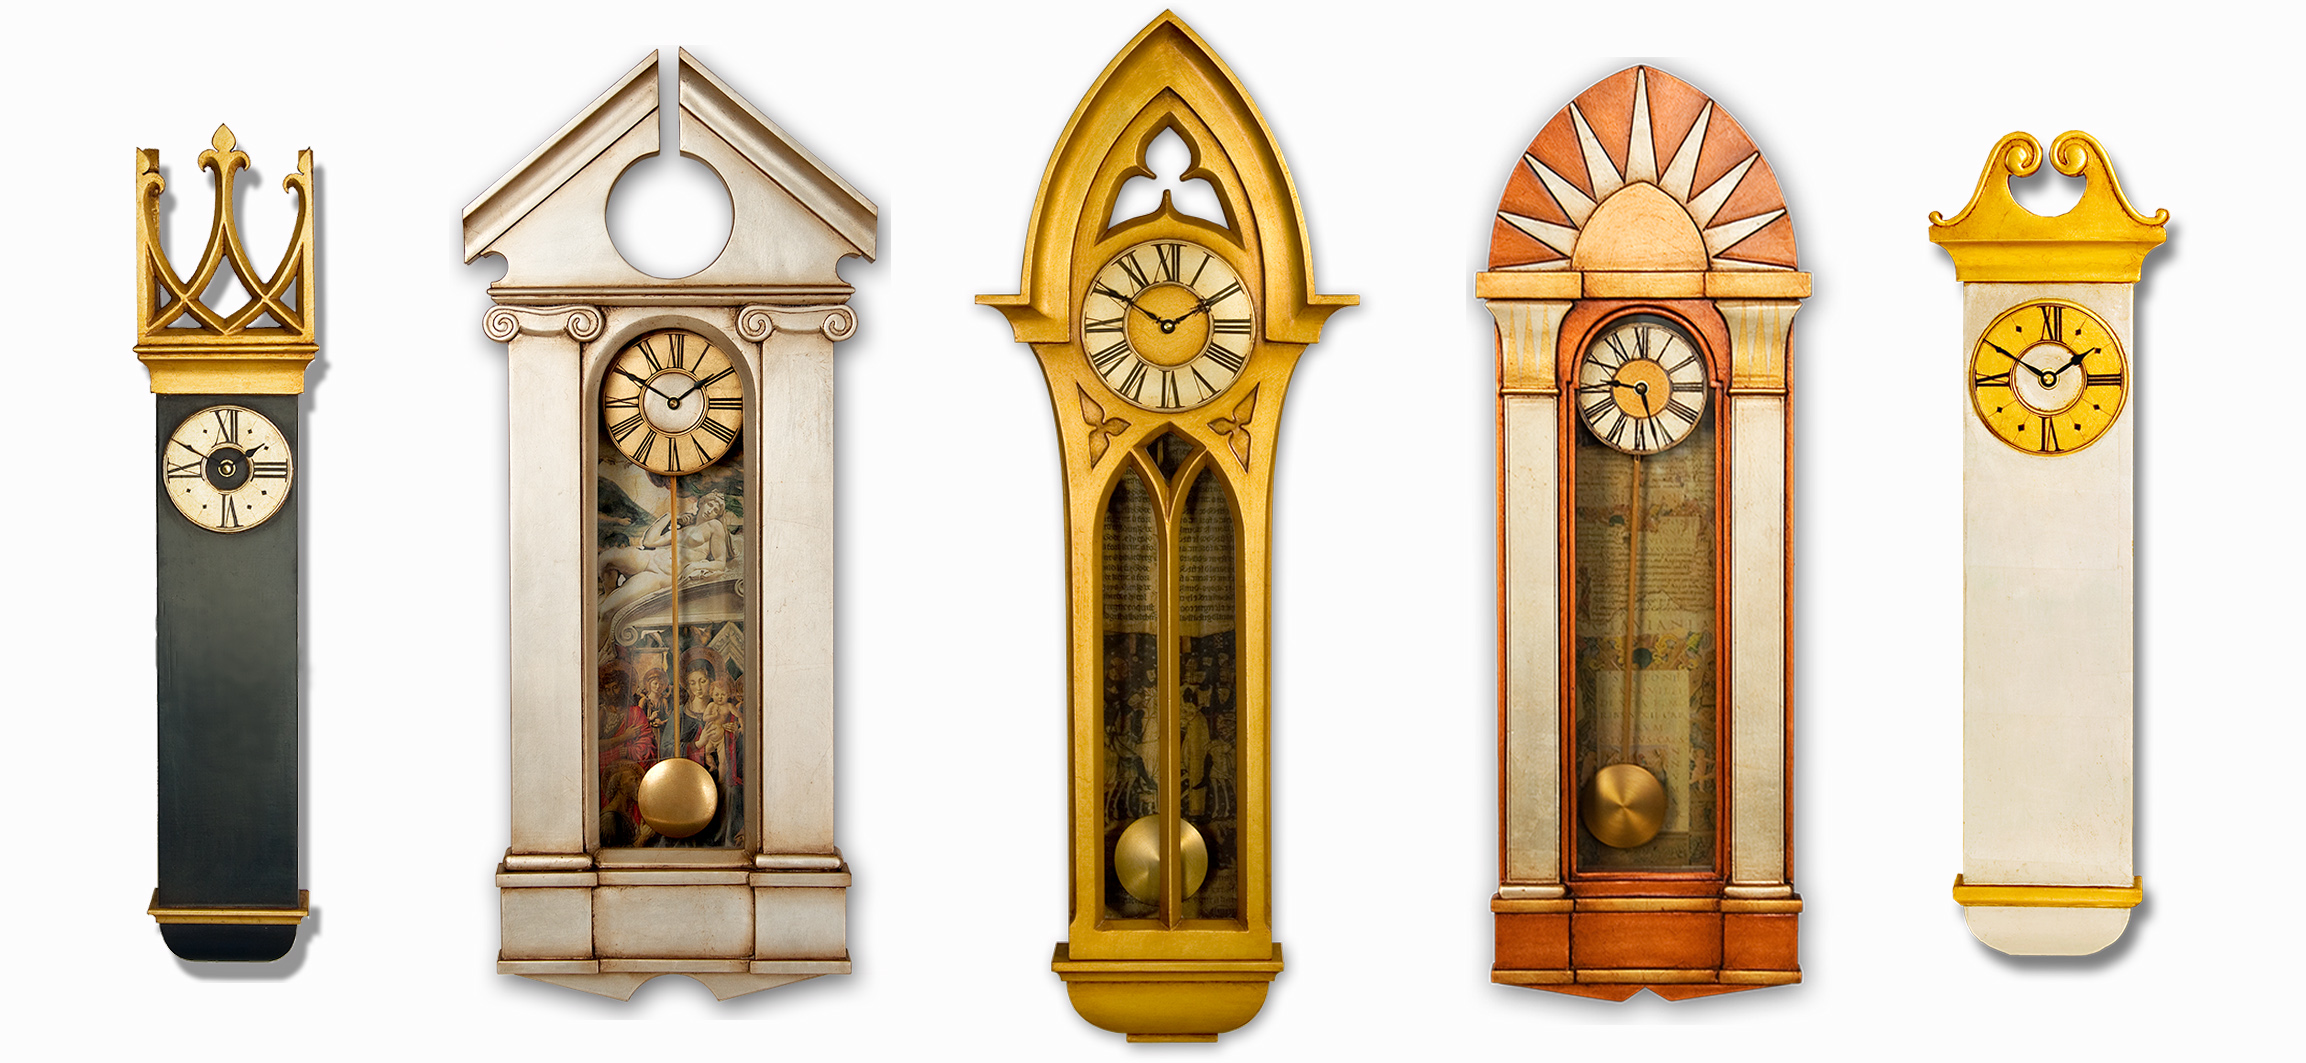 A row of wooden case clocks with different styles and sizes